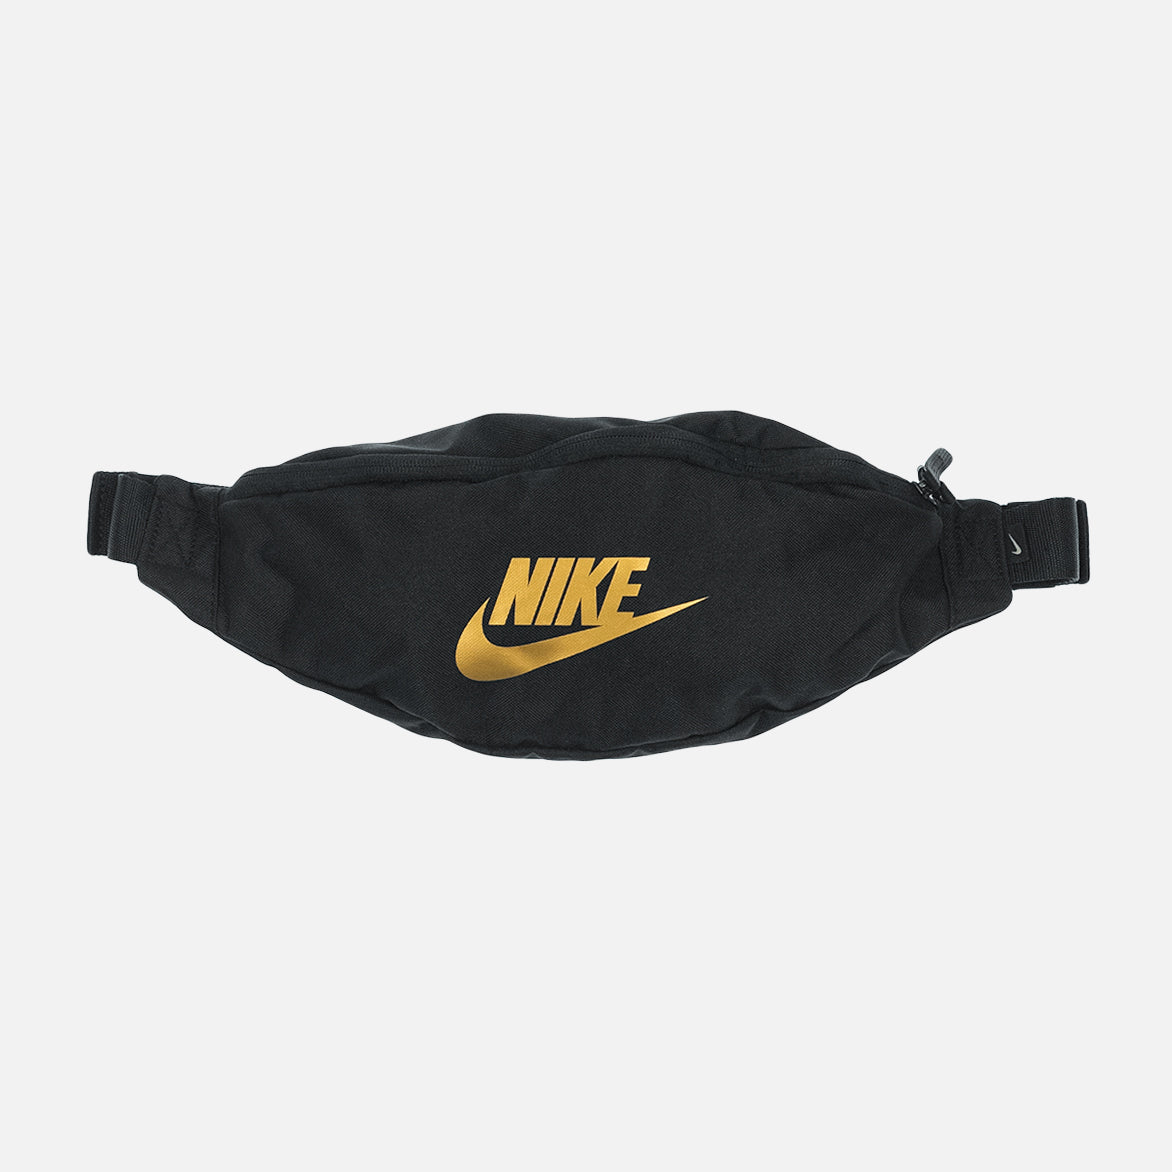 nike fanny pack gold